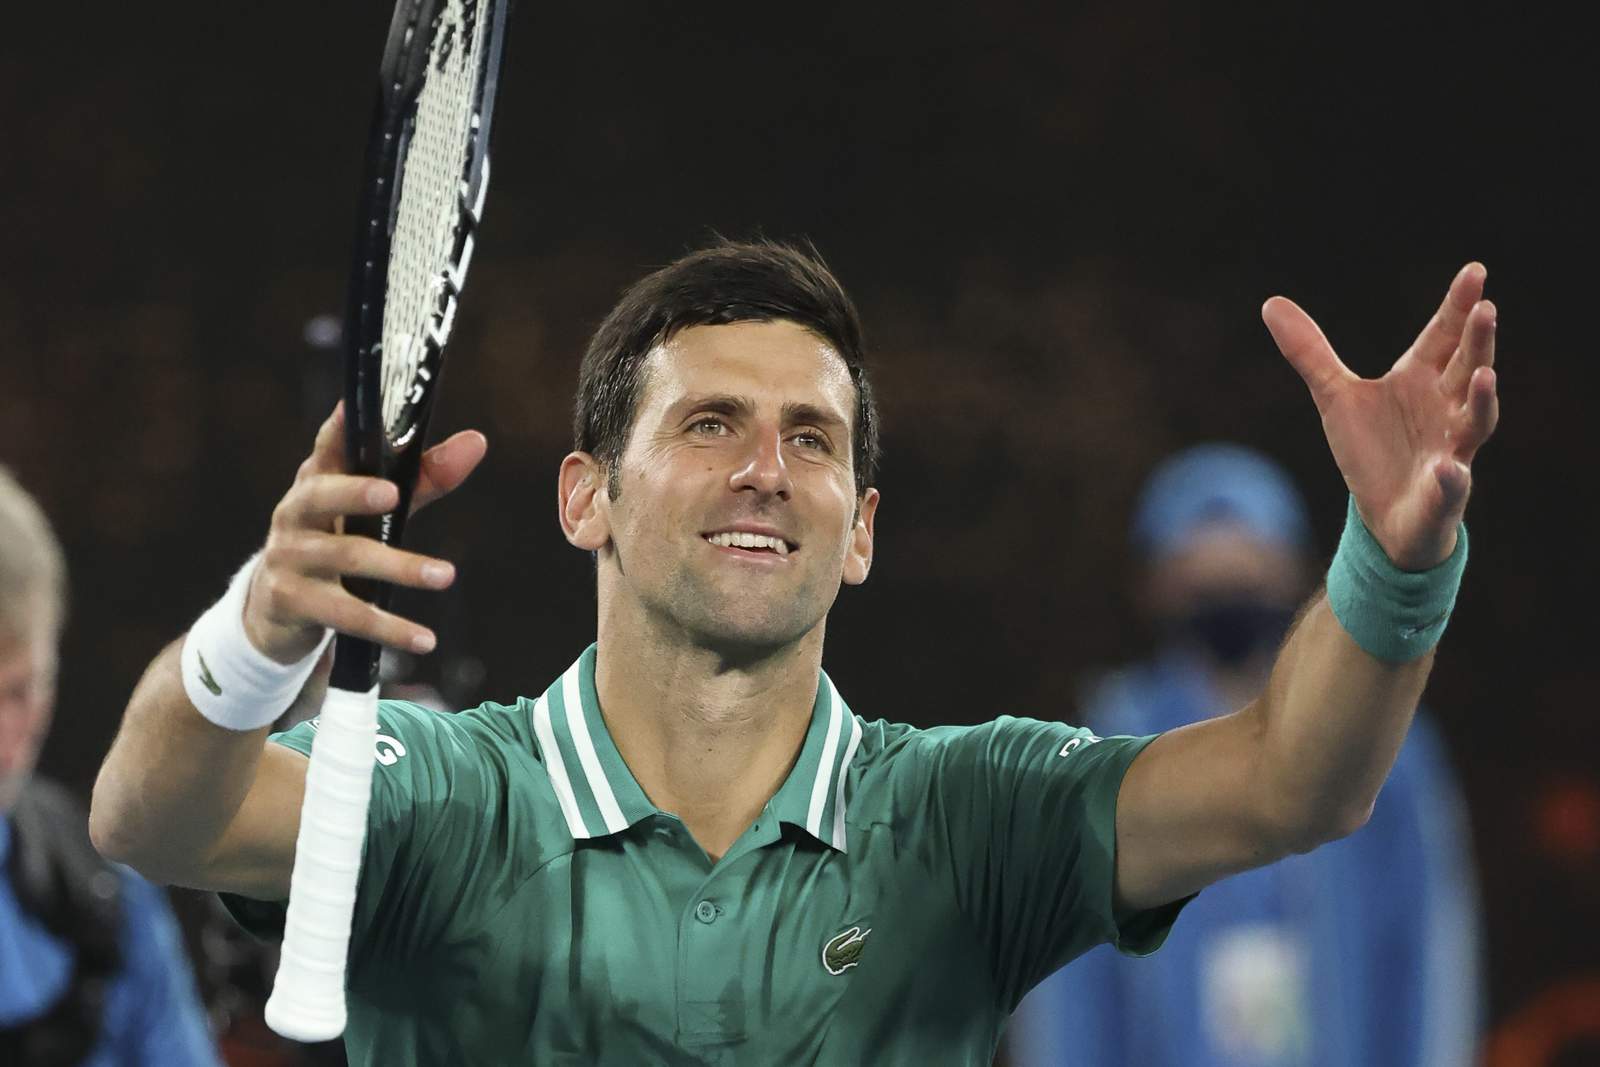 Djokovic has routine win, but crowd is something different